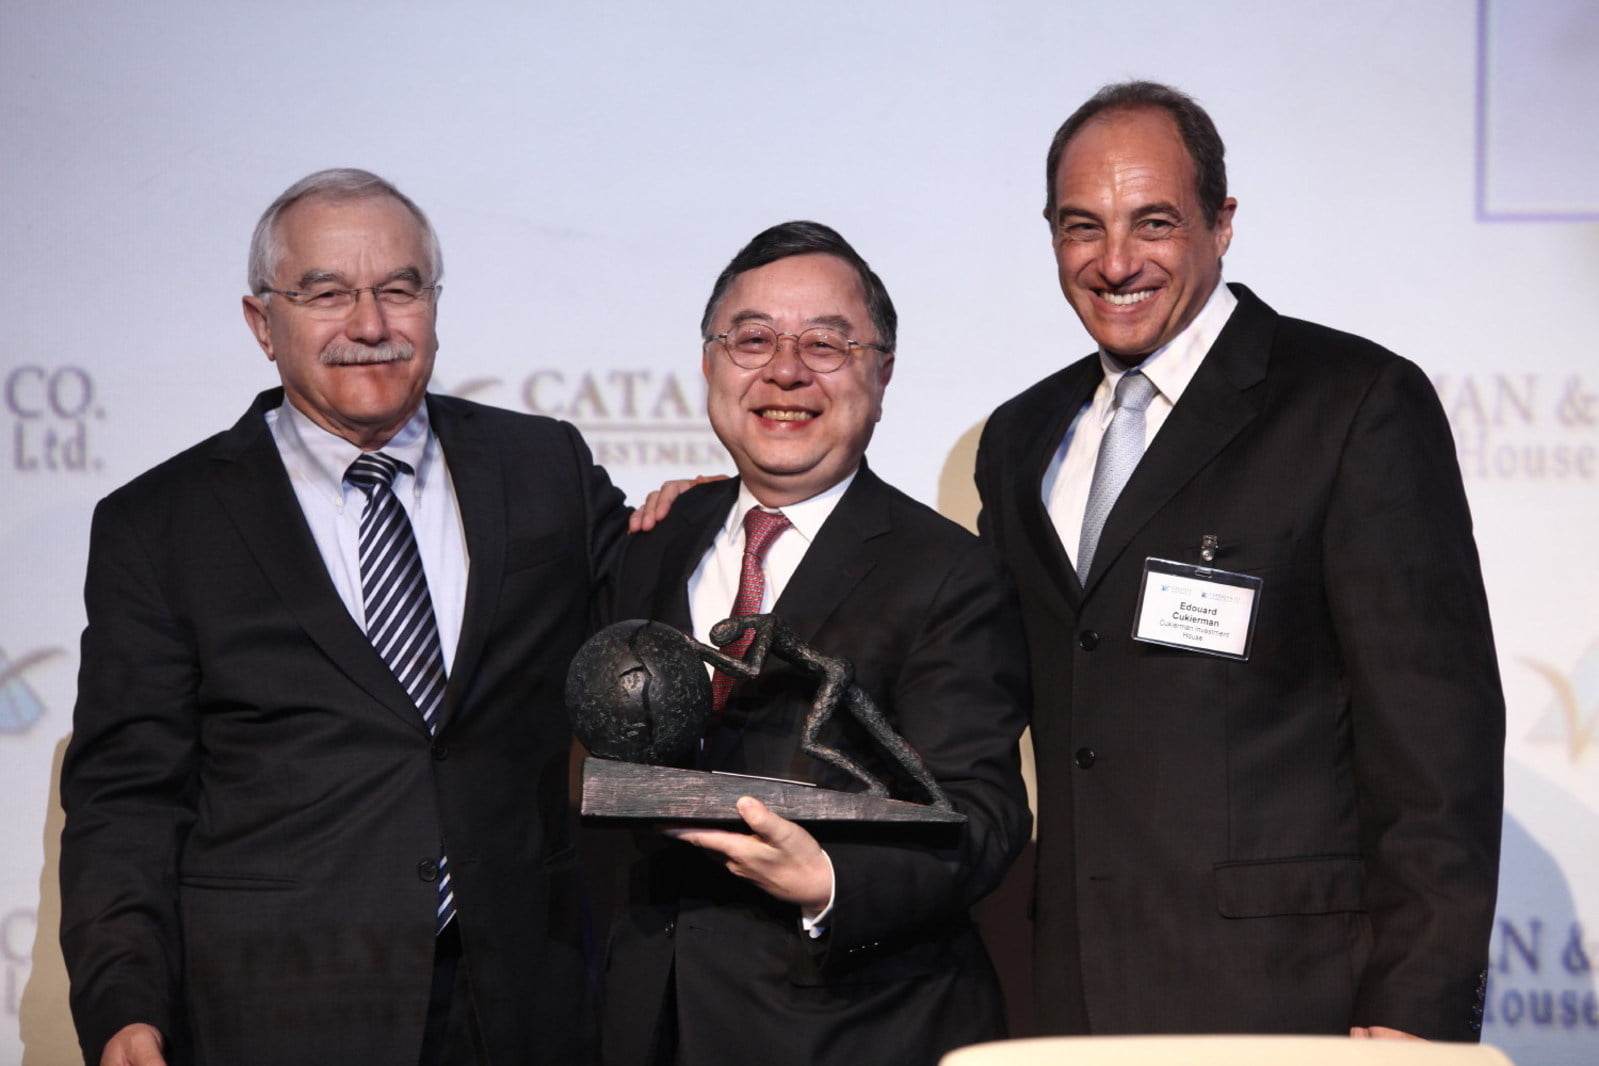 Left to Right: Yair Shamir (Managing Partner, Catalyst CEL Fund), Ronnie Chan (Chairman, Hang Lung Properties), and Edouard Cukierman (Chairman, Cukierman &amp; Co). Courtesy